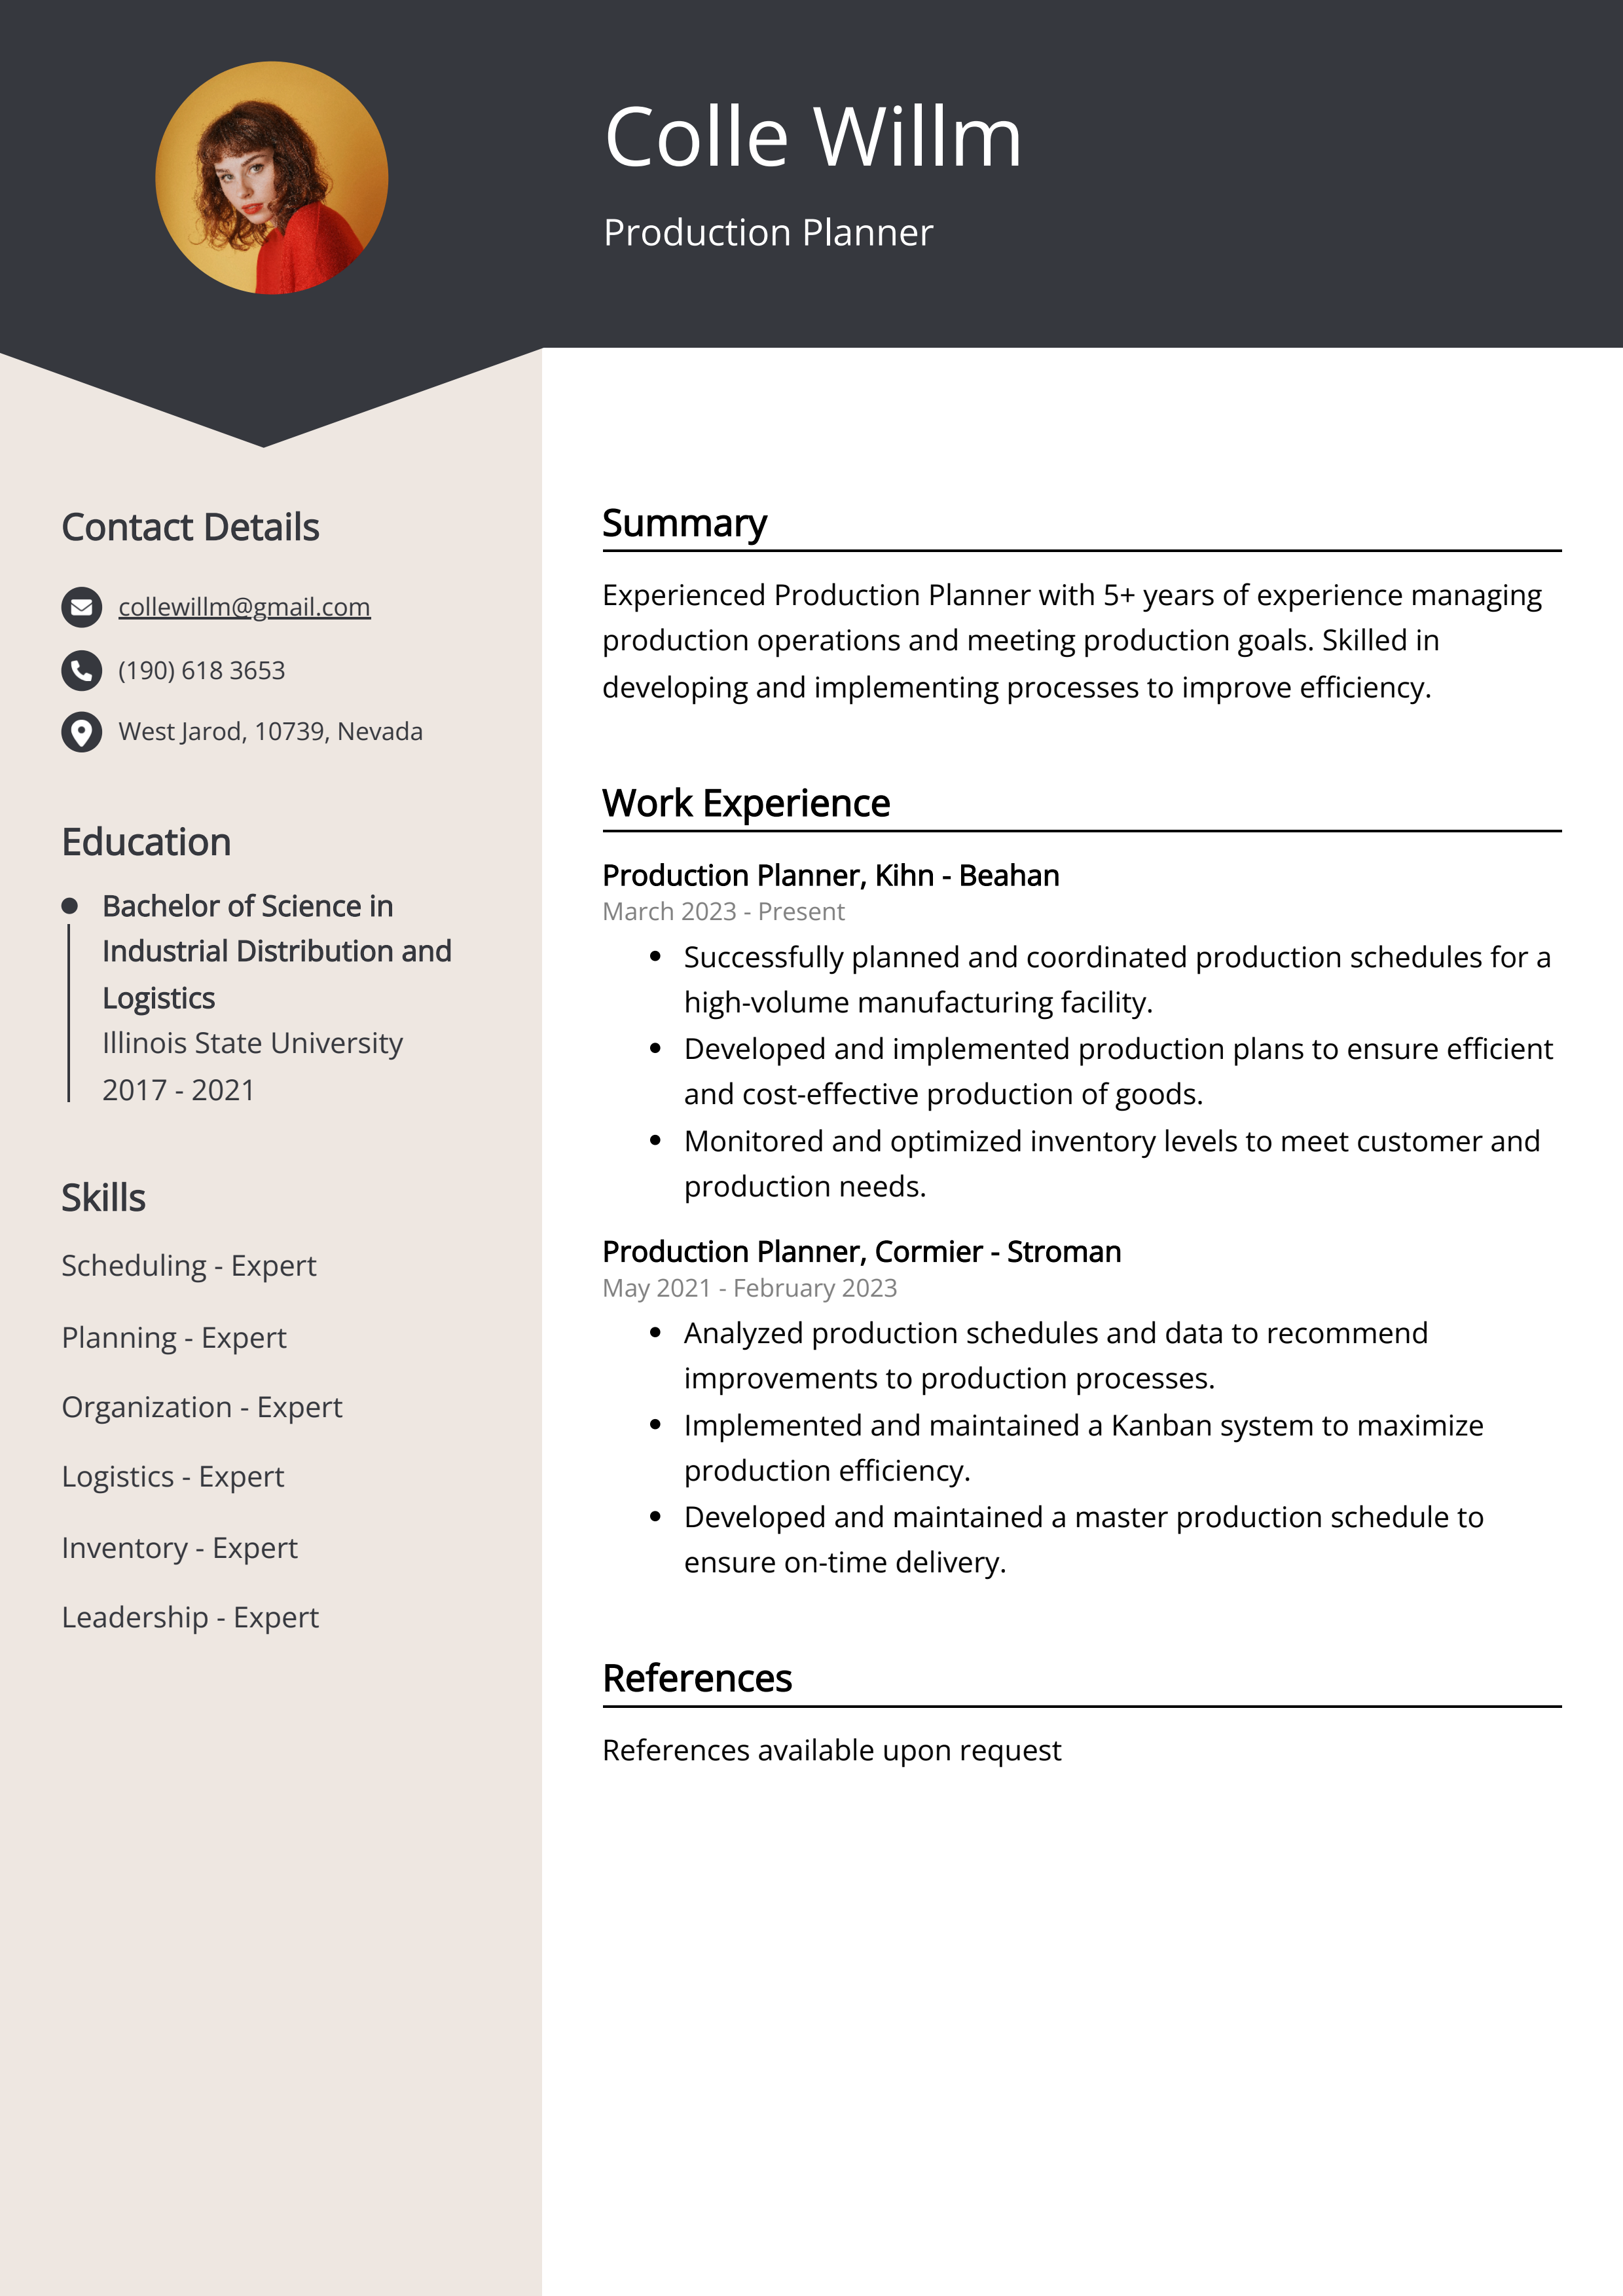 Production Planner CV Example